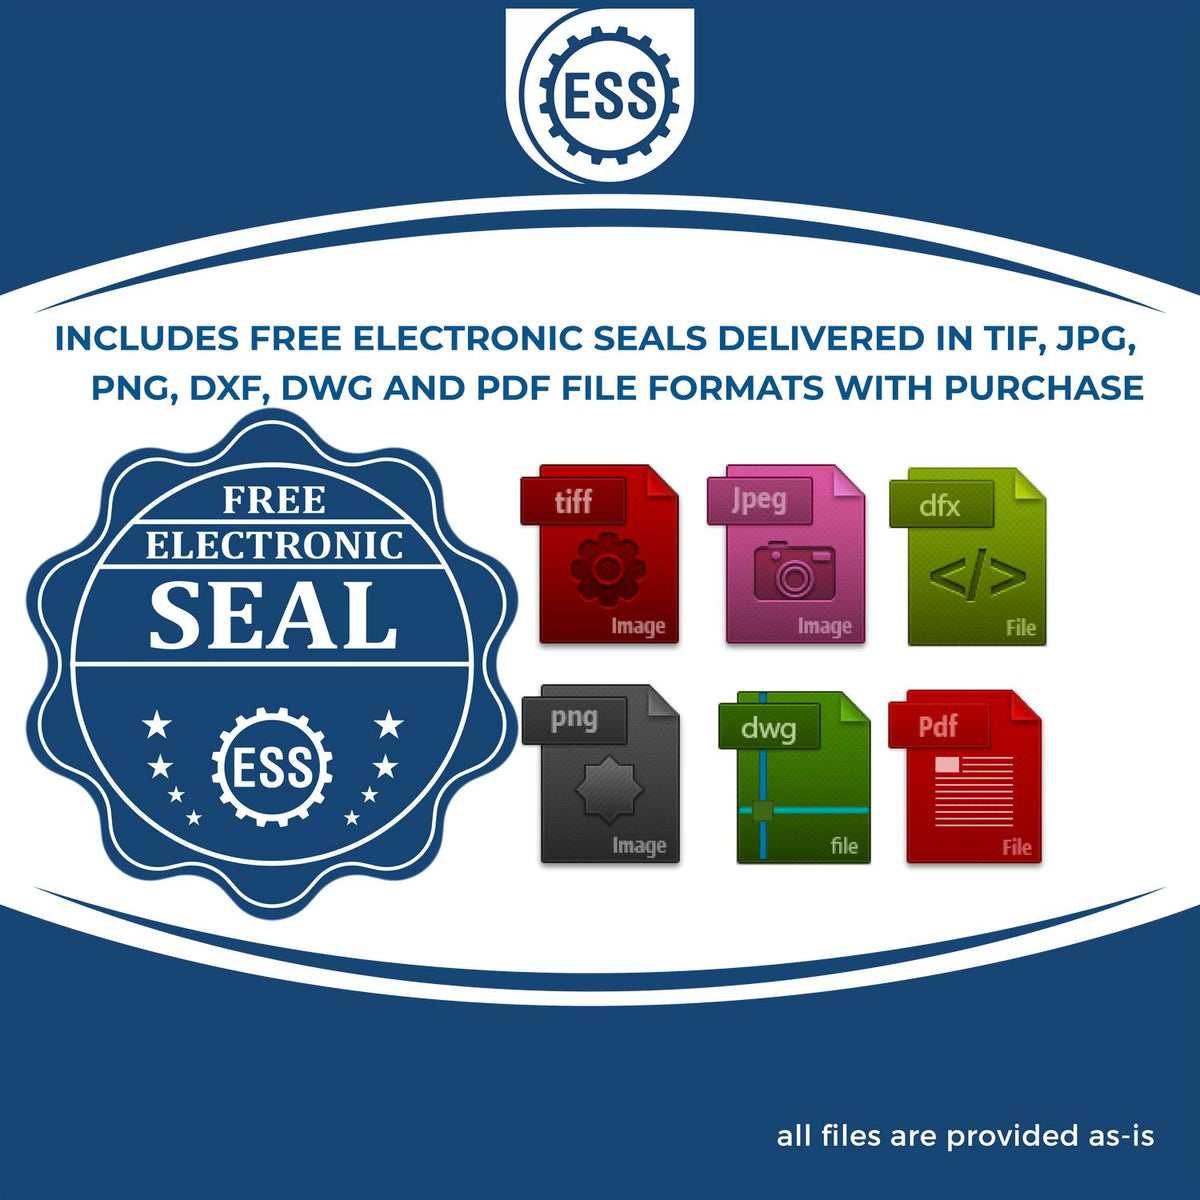 An infographic for the free electronic seal for the Handheld New Hampshire Professional Geologist Embosser illustrating the different file type icons such as DXF, DWG, TIF, JPG and PNG.